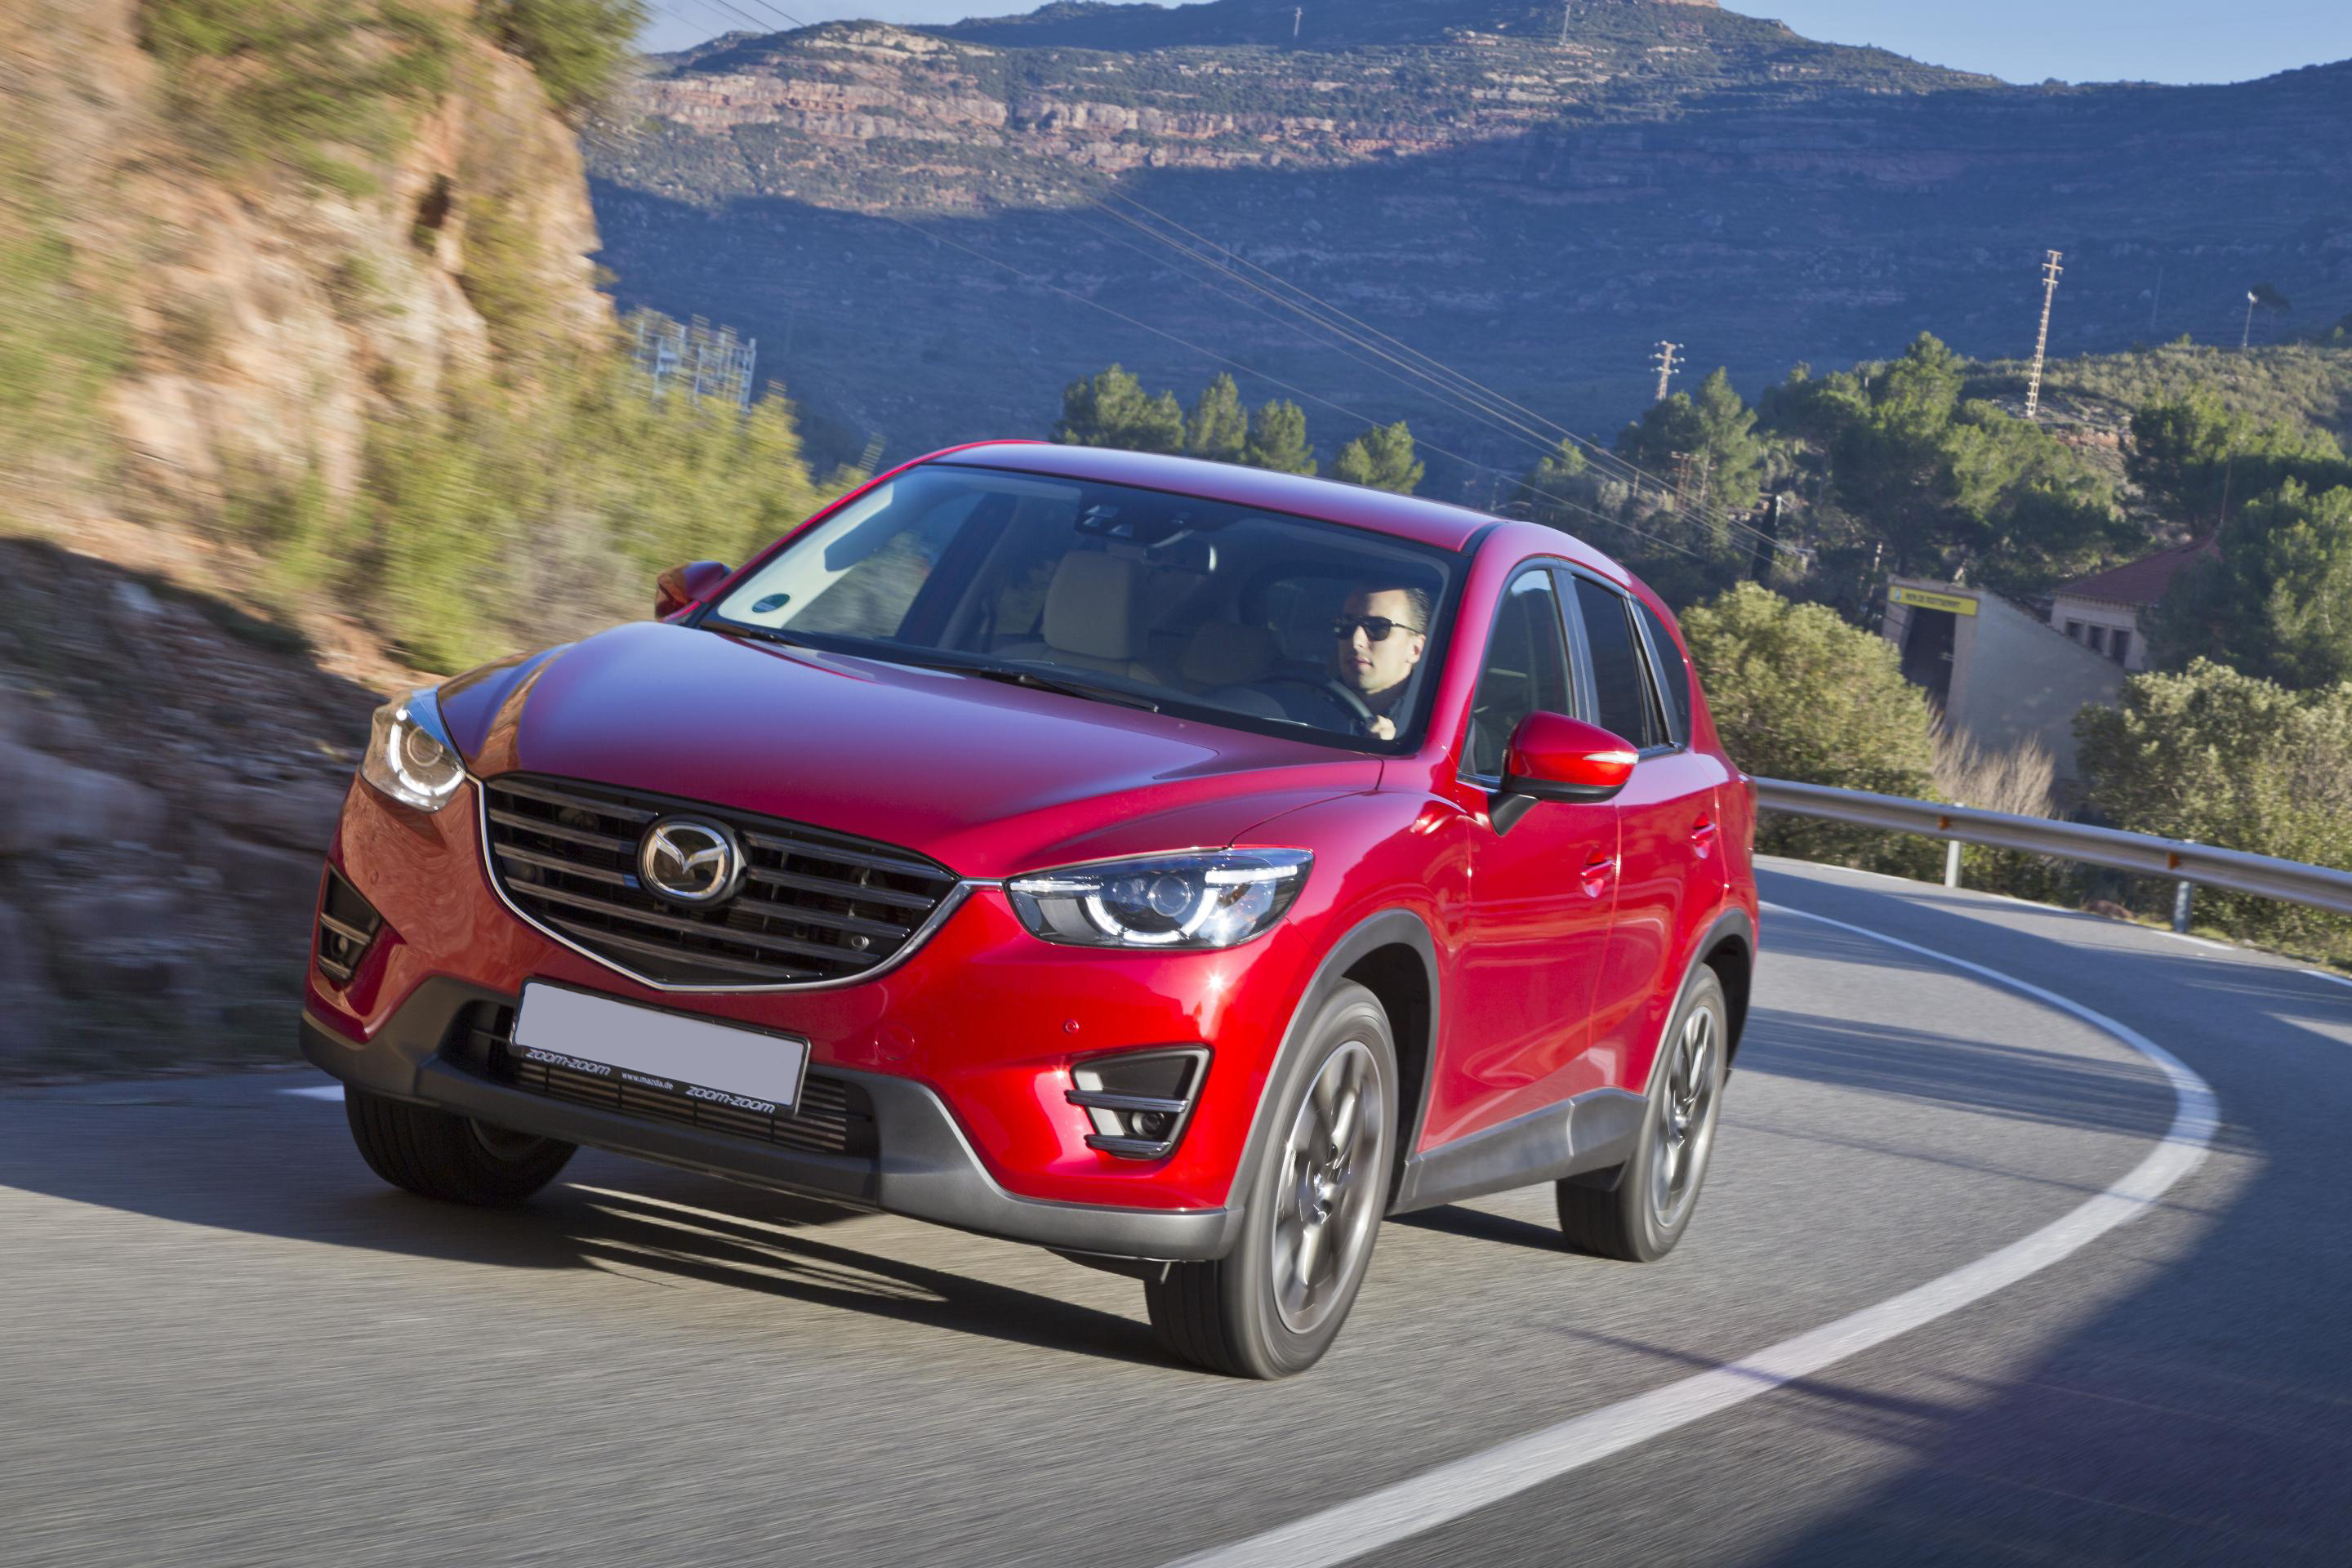 Mazda CX-5 SUV 2015 pictures | Carbuyer